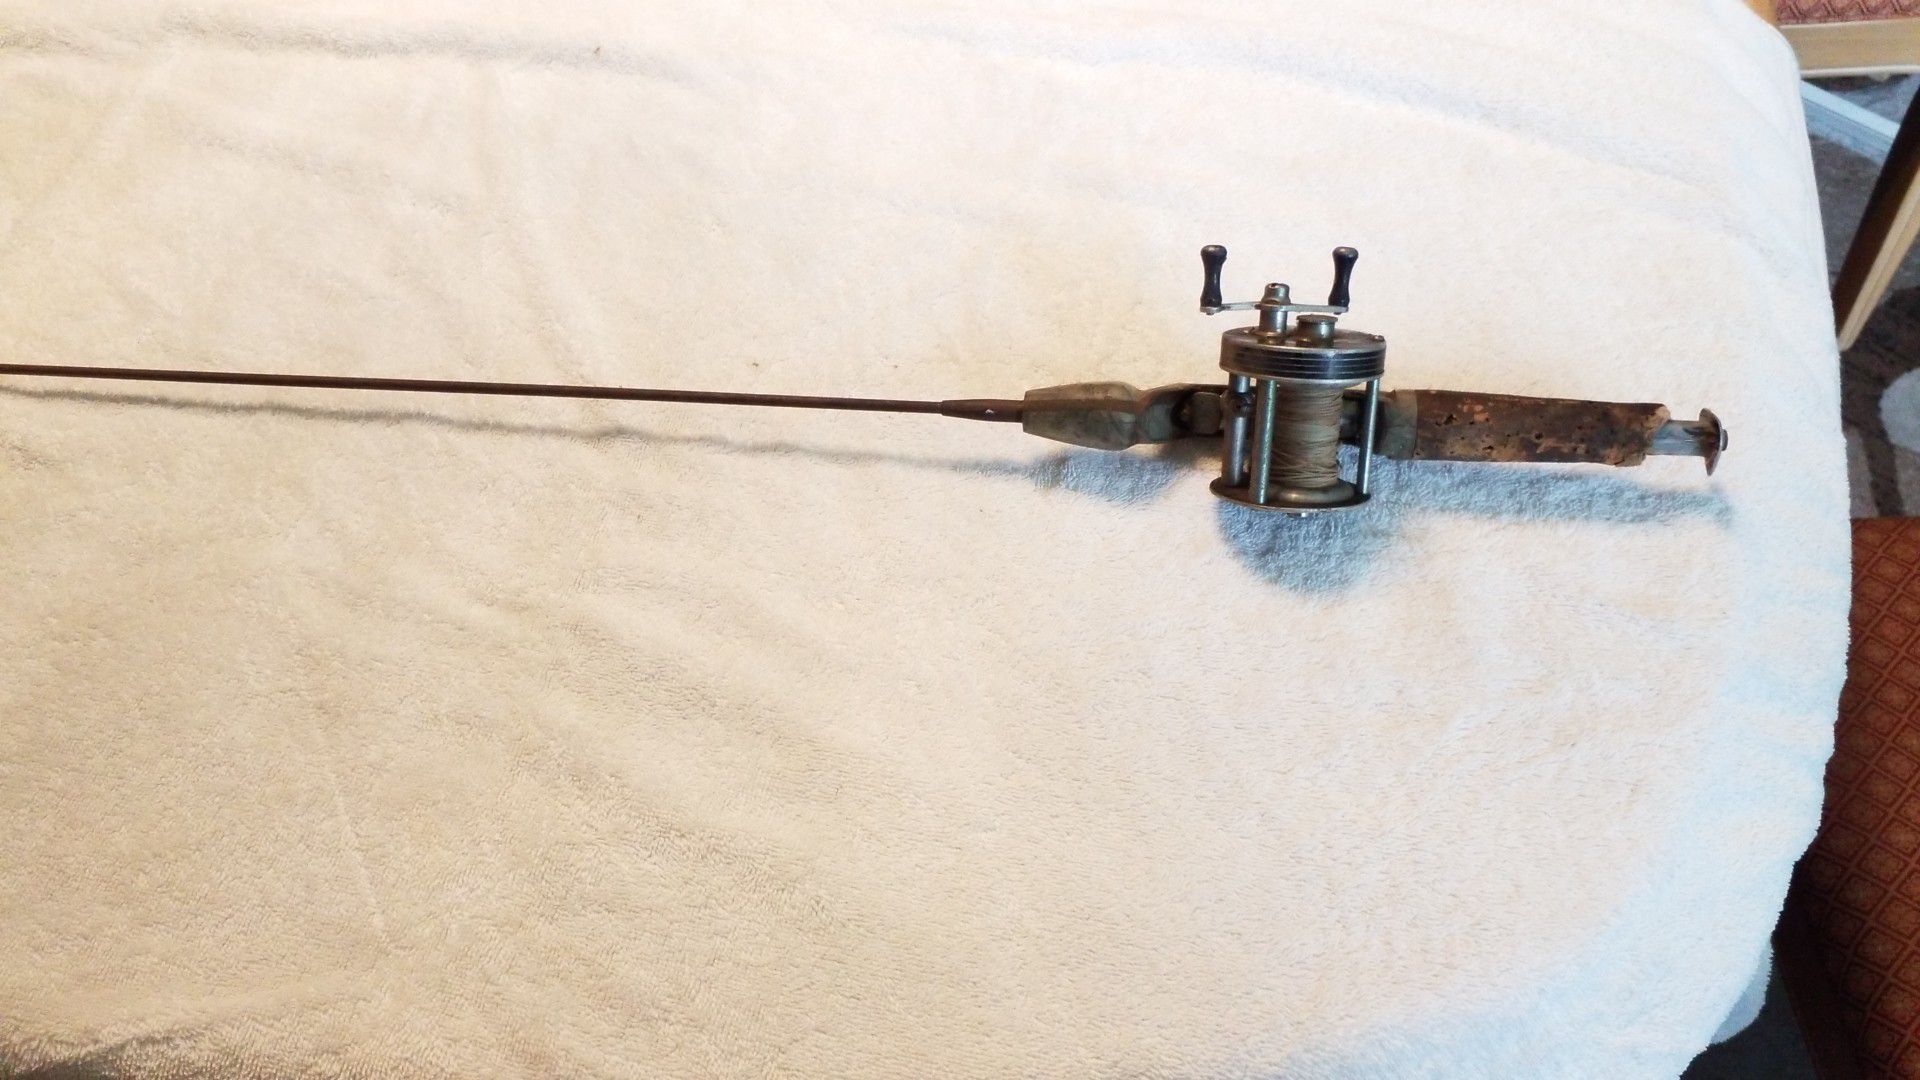 Antique Langley "streamlite" fishing real with a "steel" rod. ( early 1950's)